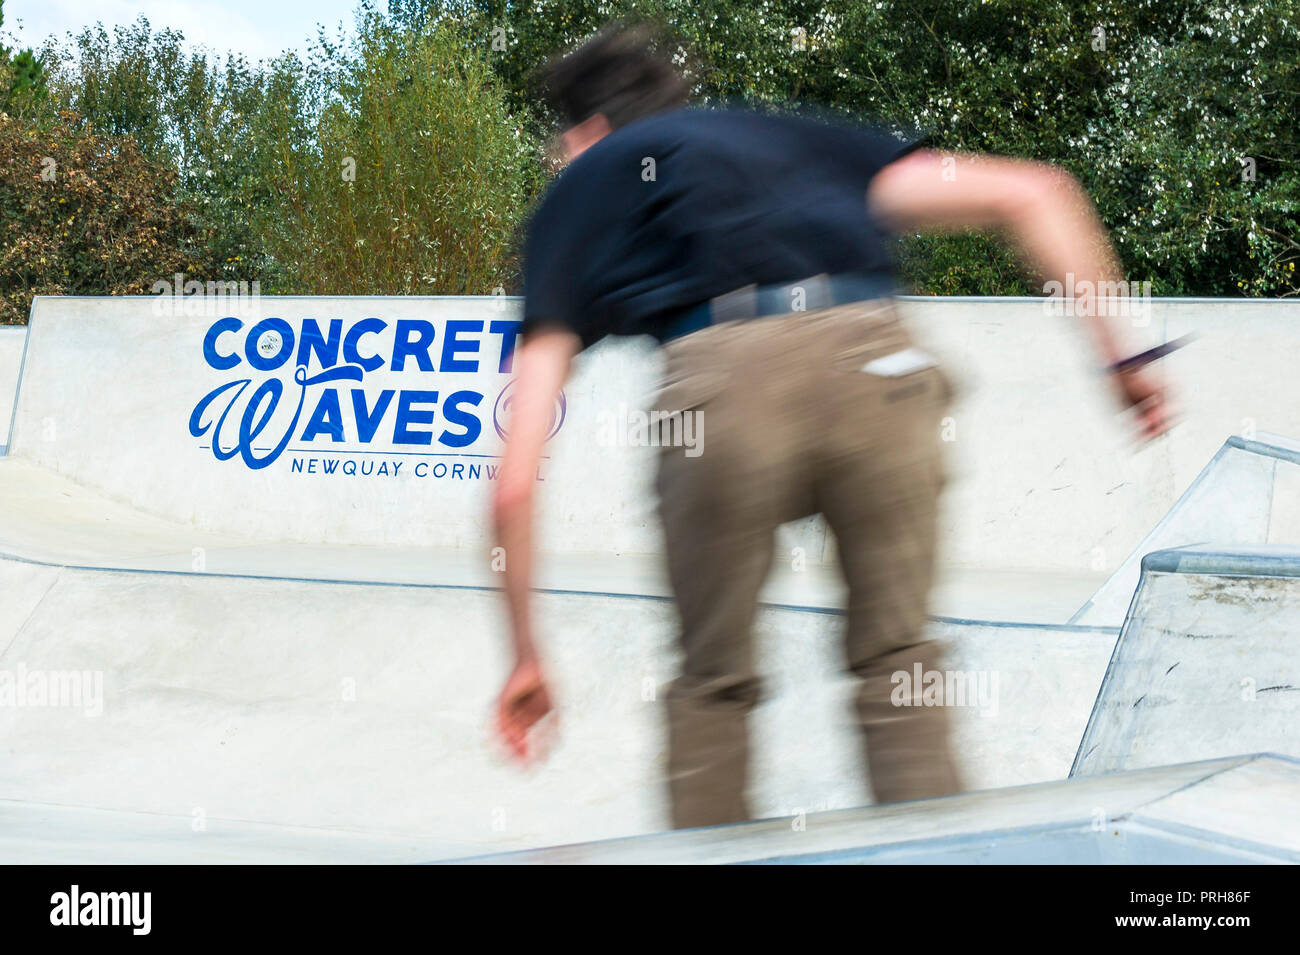 Skateboarding activity at Concrete Waves in Newquay in Cornwall. Stock Photo